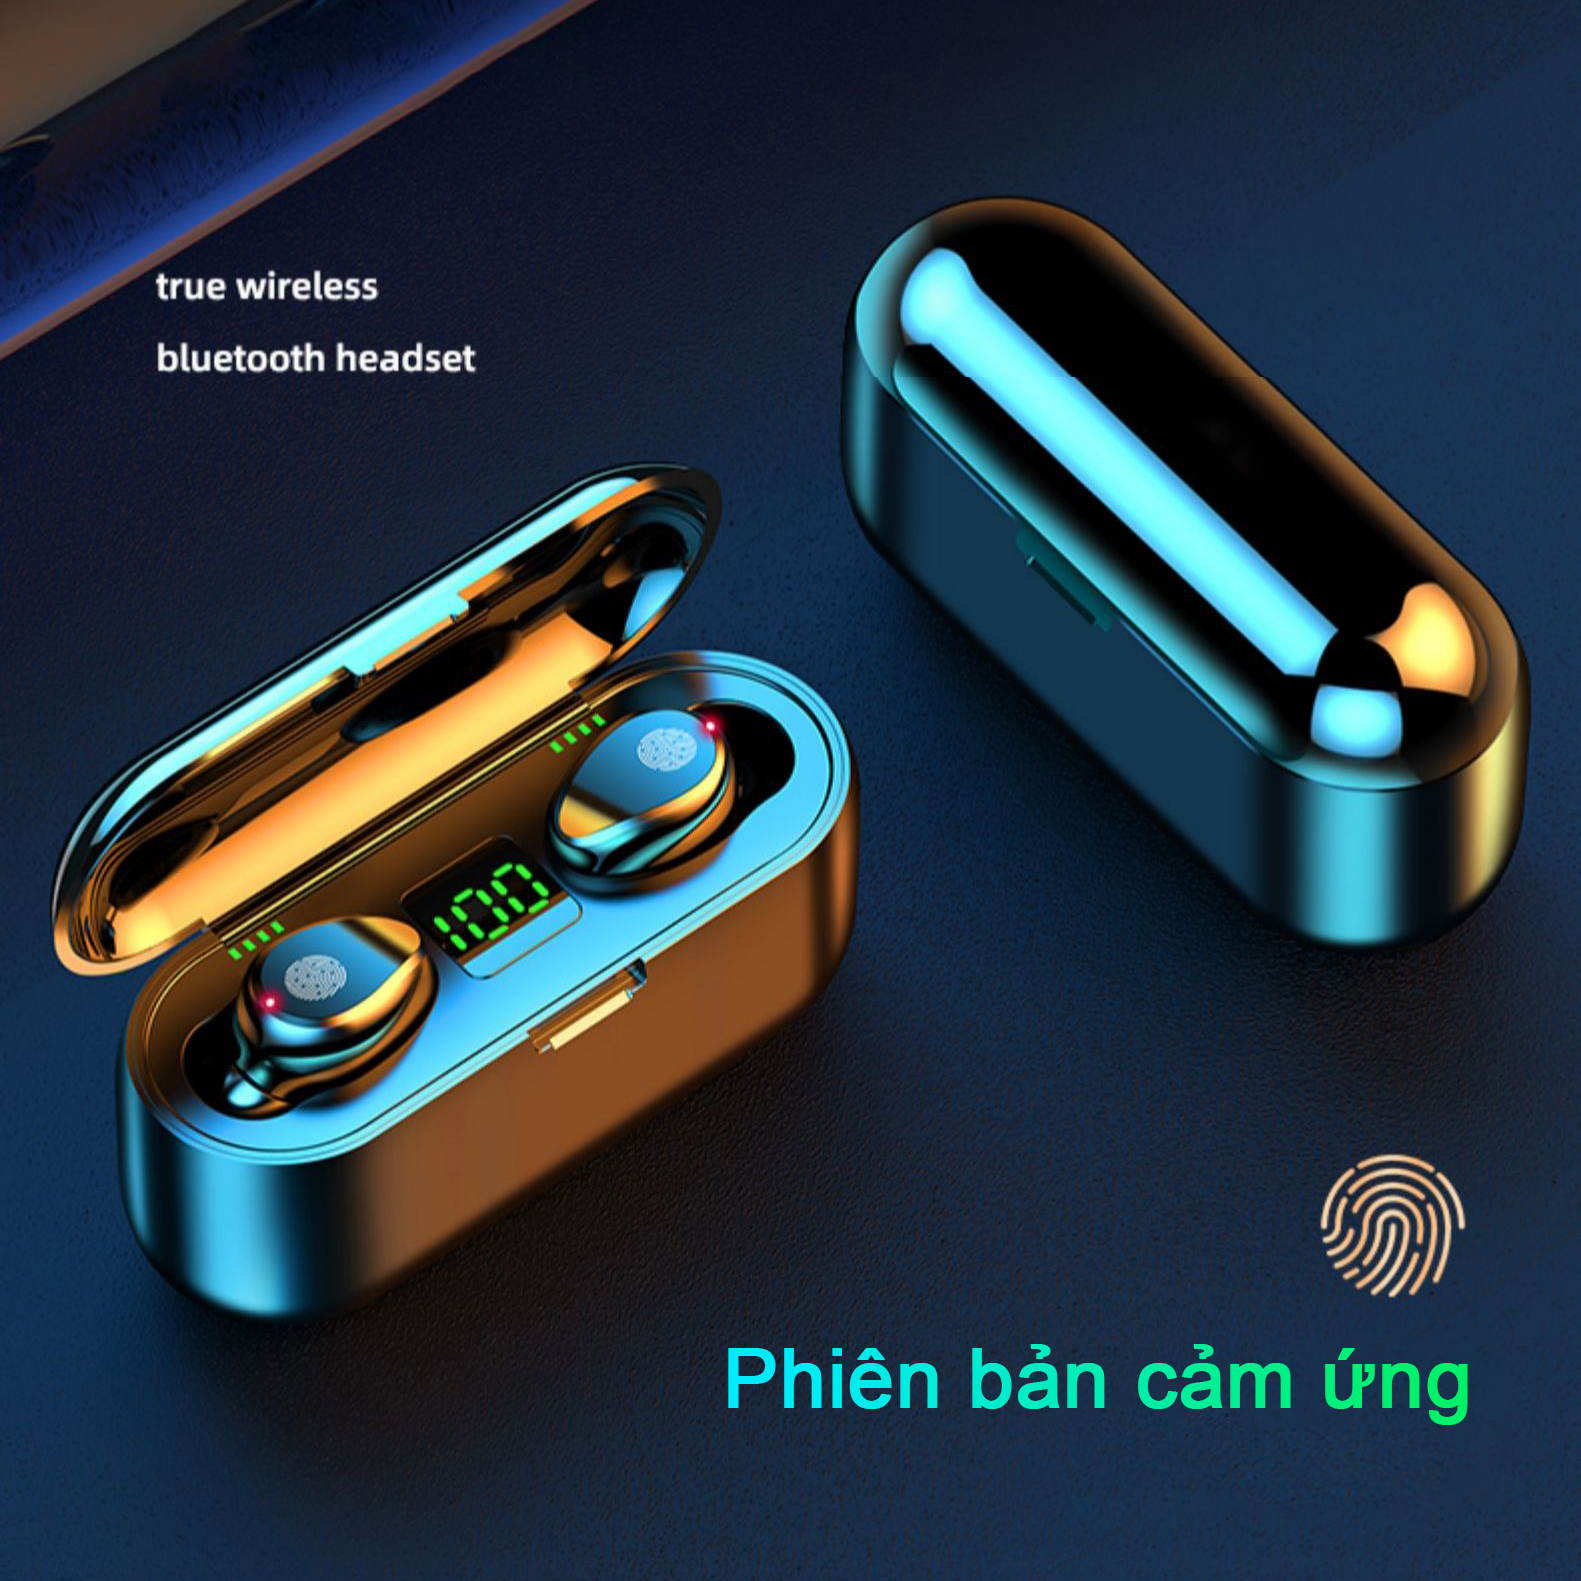 Original KIMISO F9 TWS Earphone Wireless Earbuds Bluetooth 5.0 Headset Touch Control LED Display Waterproof 2000mAh Charger Box